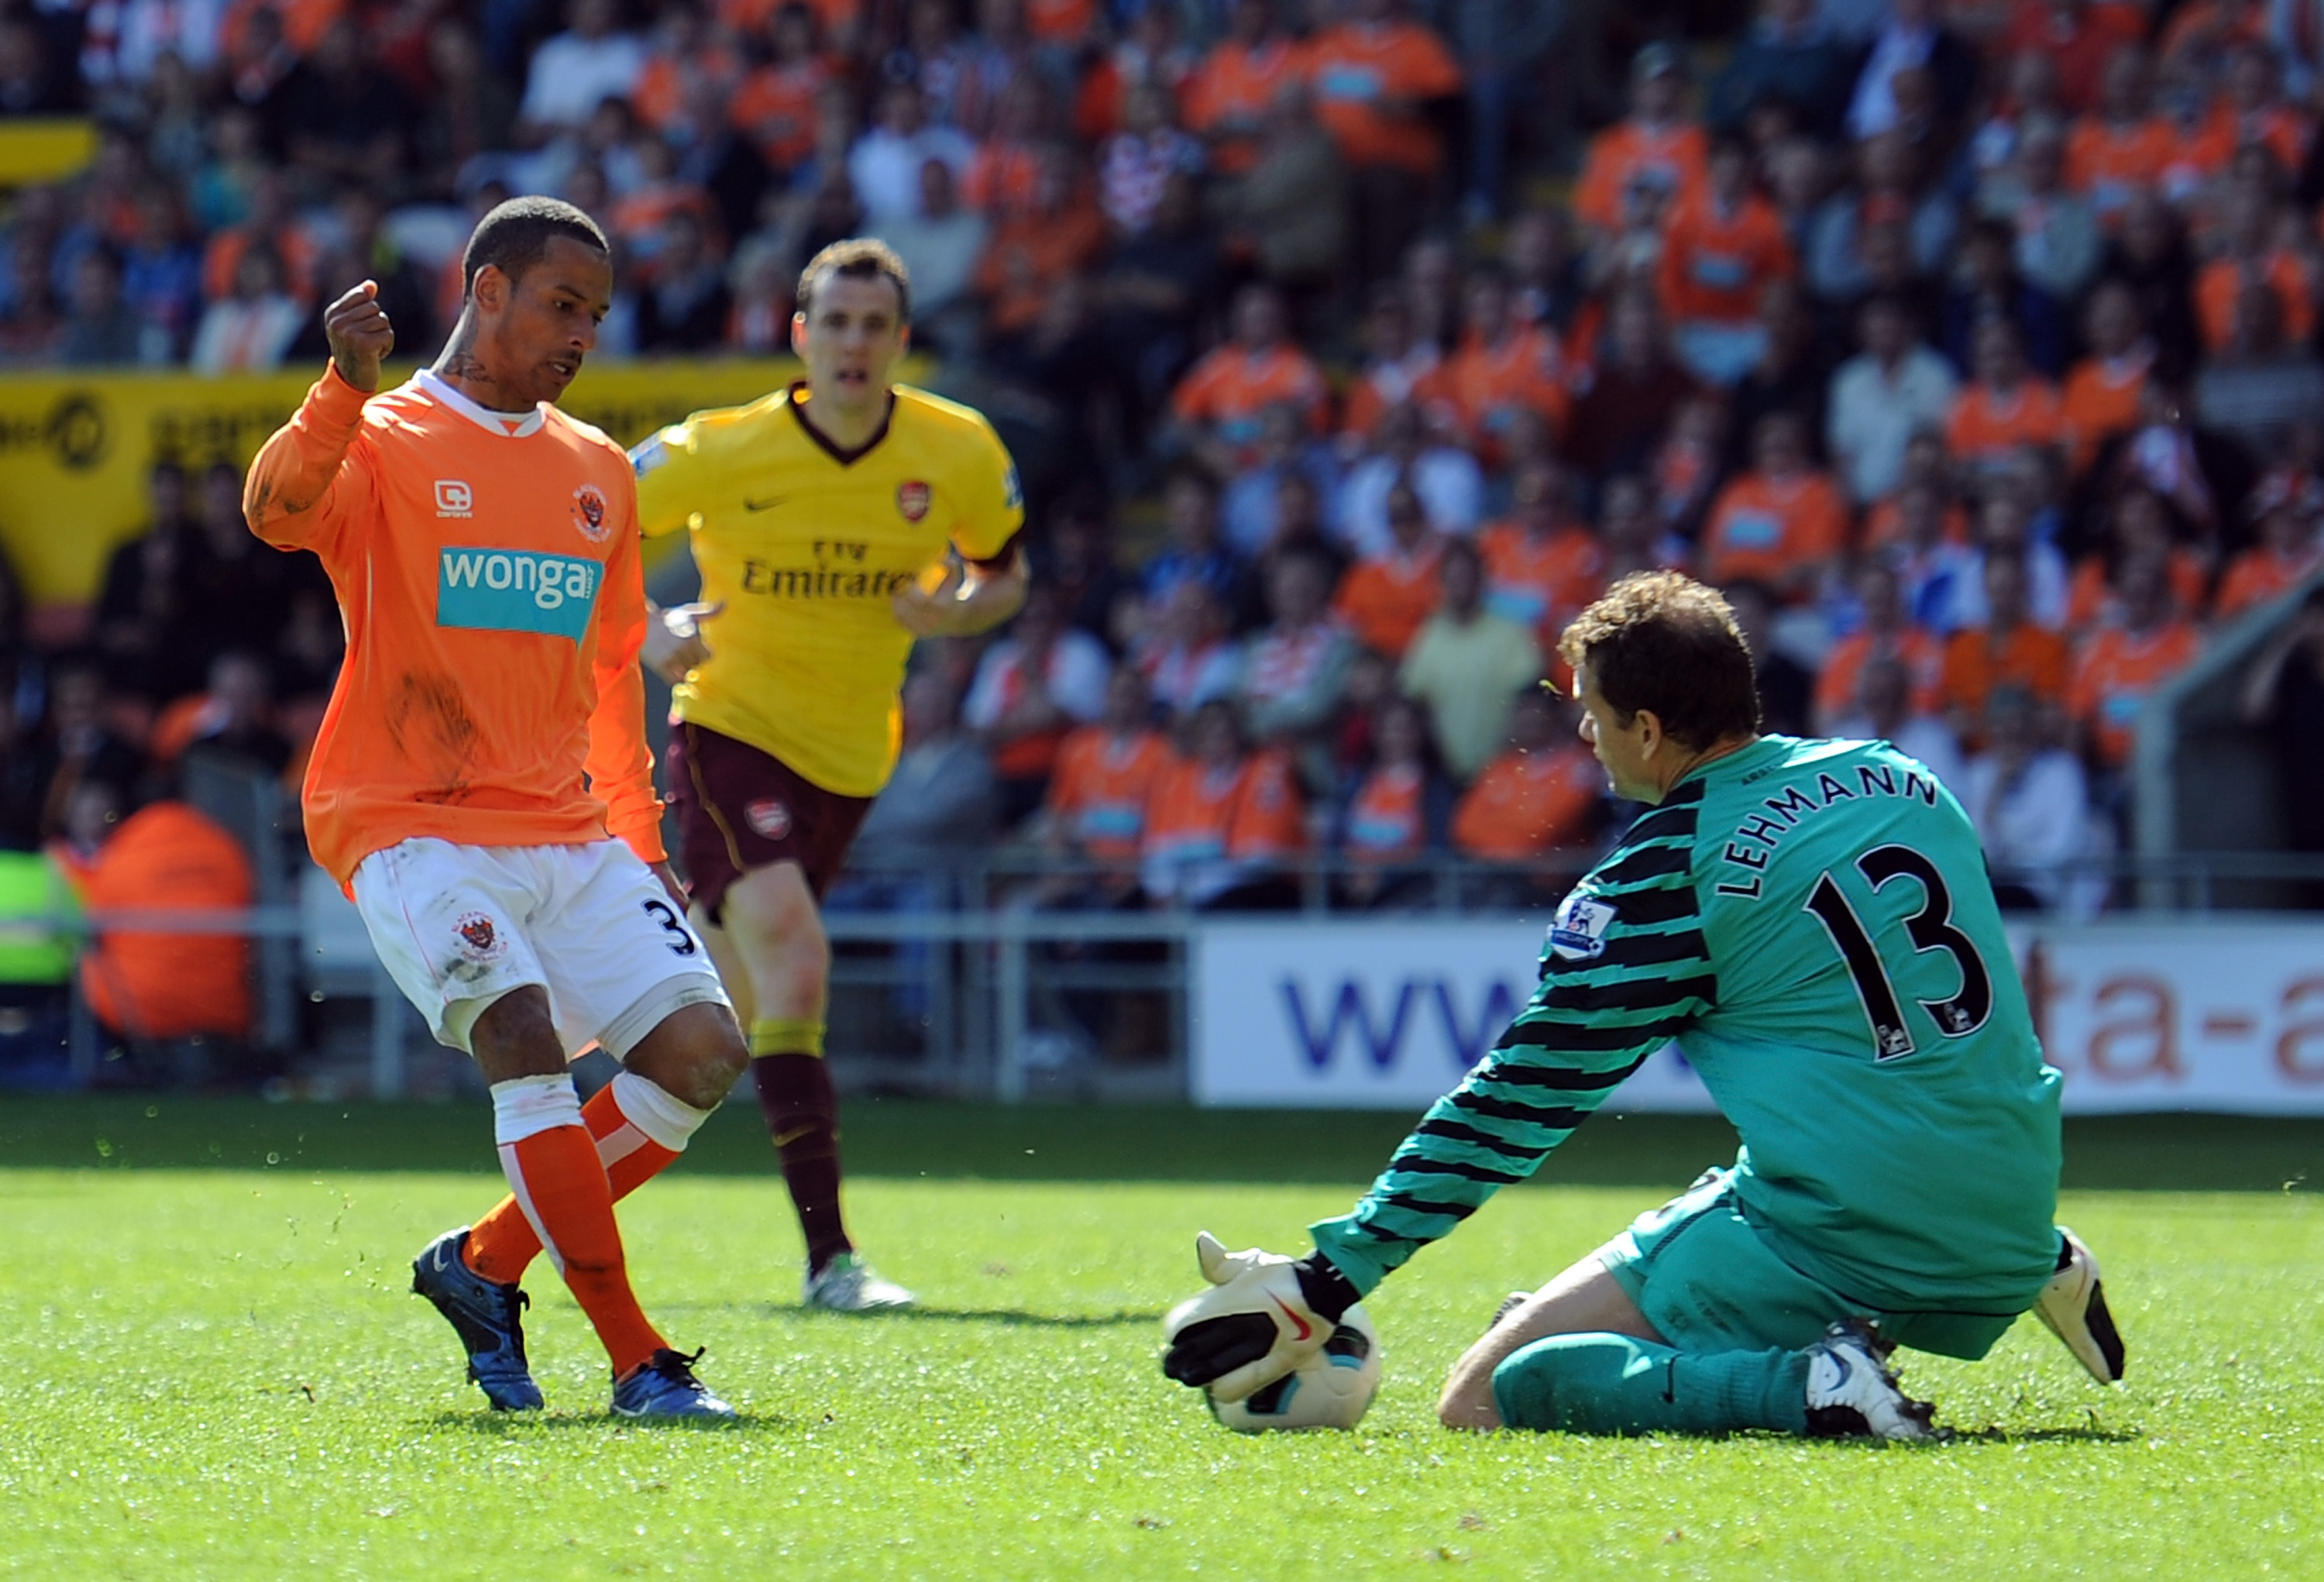 BLACKPOOL, ENGLAND - APRIL 10:  Jens Lehmann of Arsenal saves the shot of DJ Campbell of Blackpool during the Barclays Premier League match between Blackpool and Arsenal at Bloomfield Road on April 10, 2011 in Blackpool, England.  (Photo by Chris Brunskil